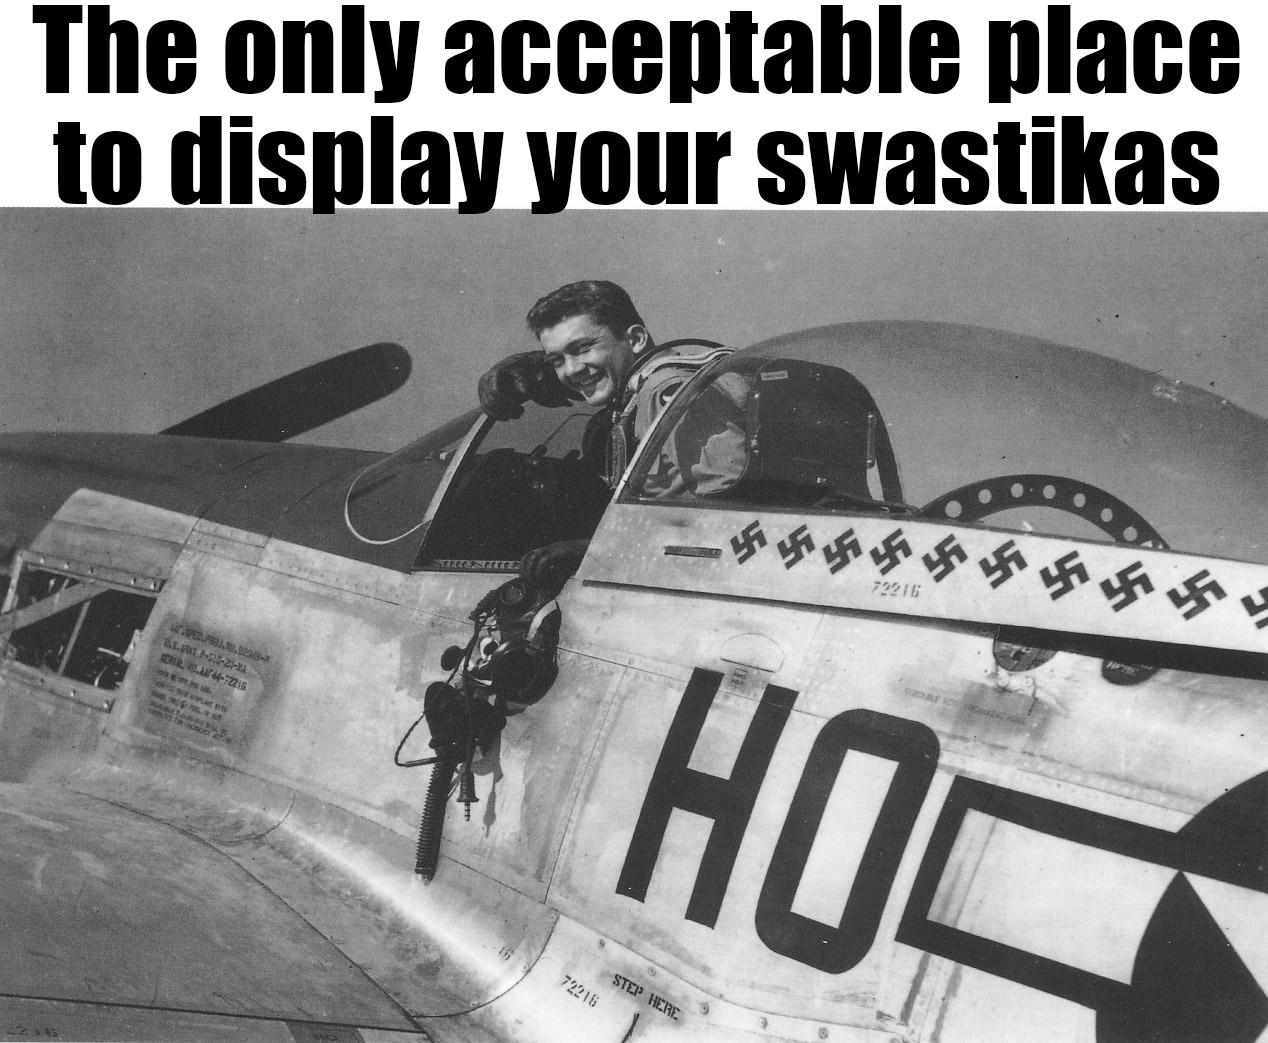 airplane - The only acceptable place to display your swastikas 79216 . 4472216 Hoc 72216 Step Here